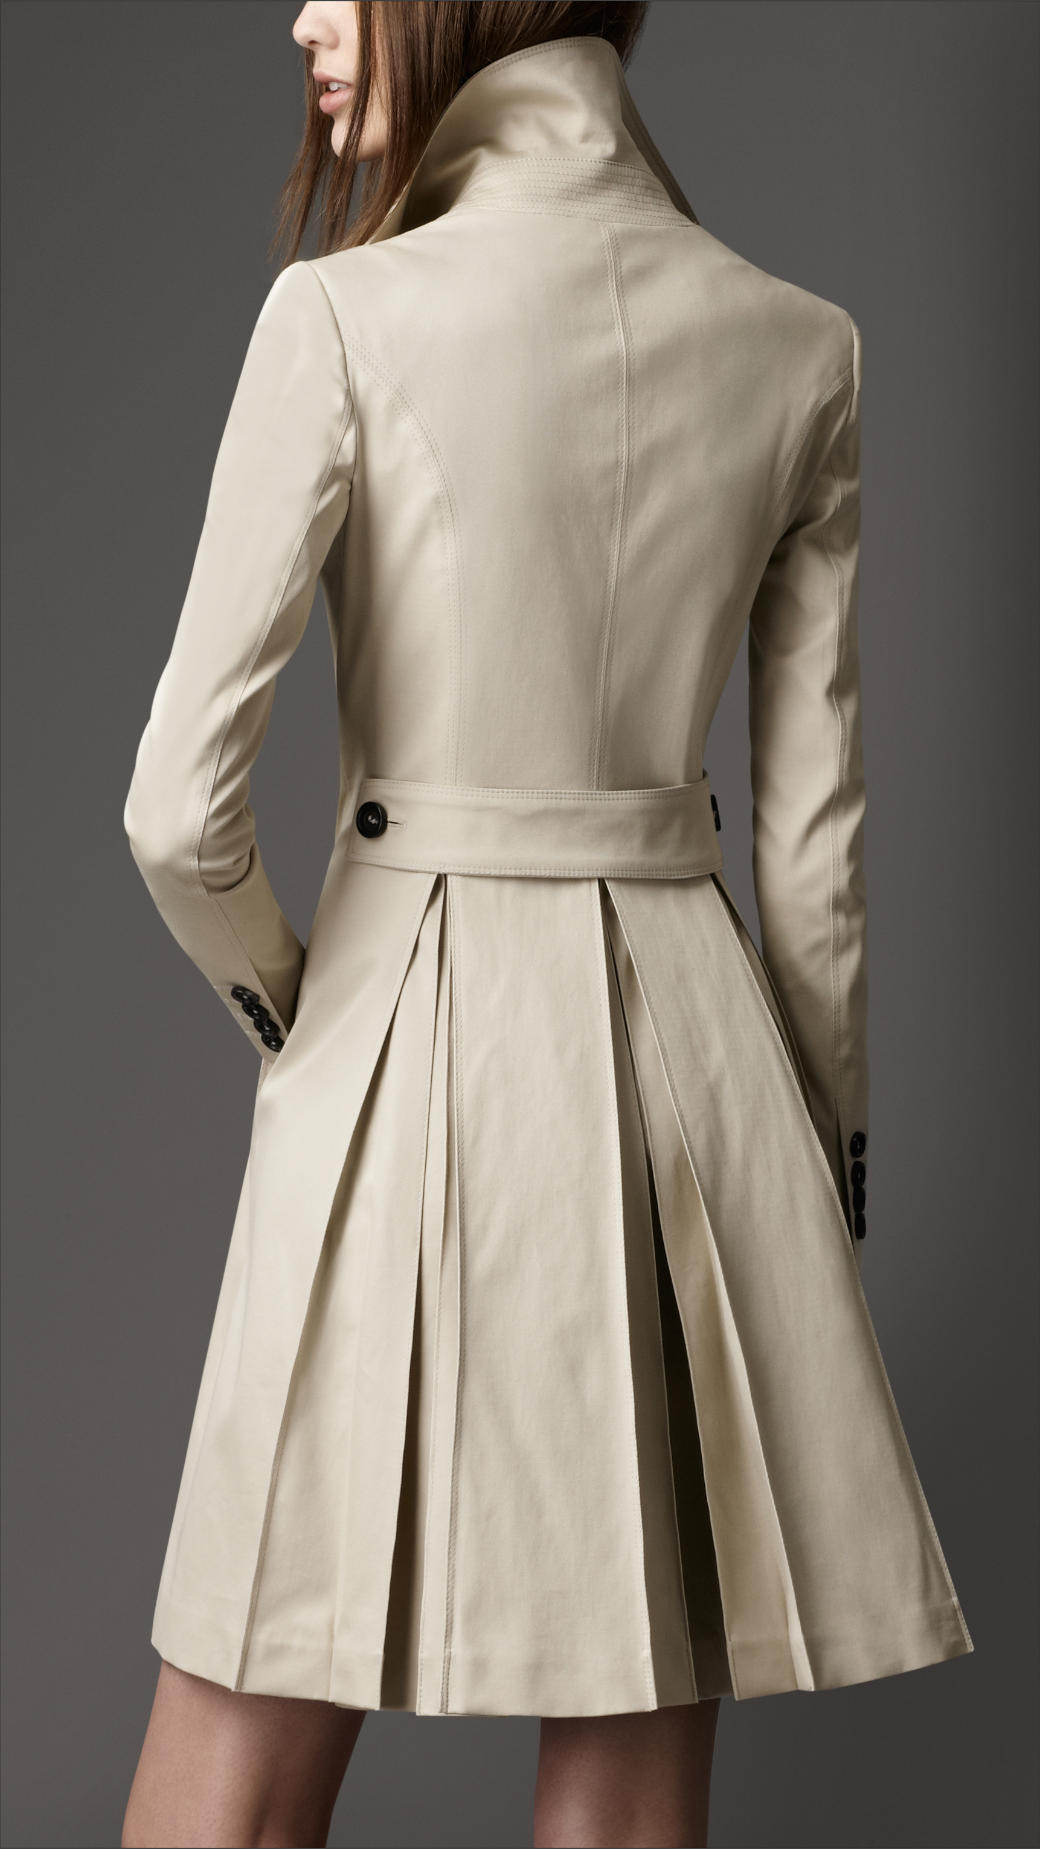 Lyst - Burberry Pleated Cotton Coat in Natural